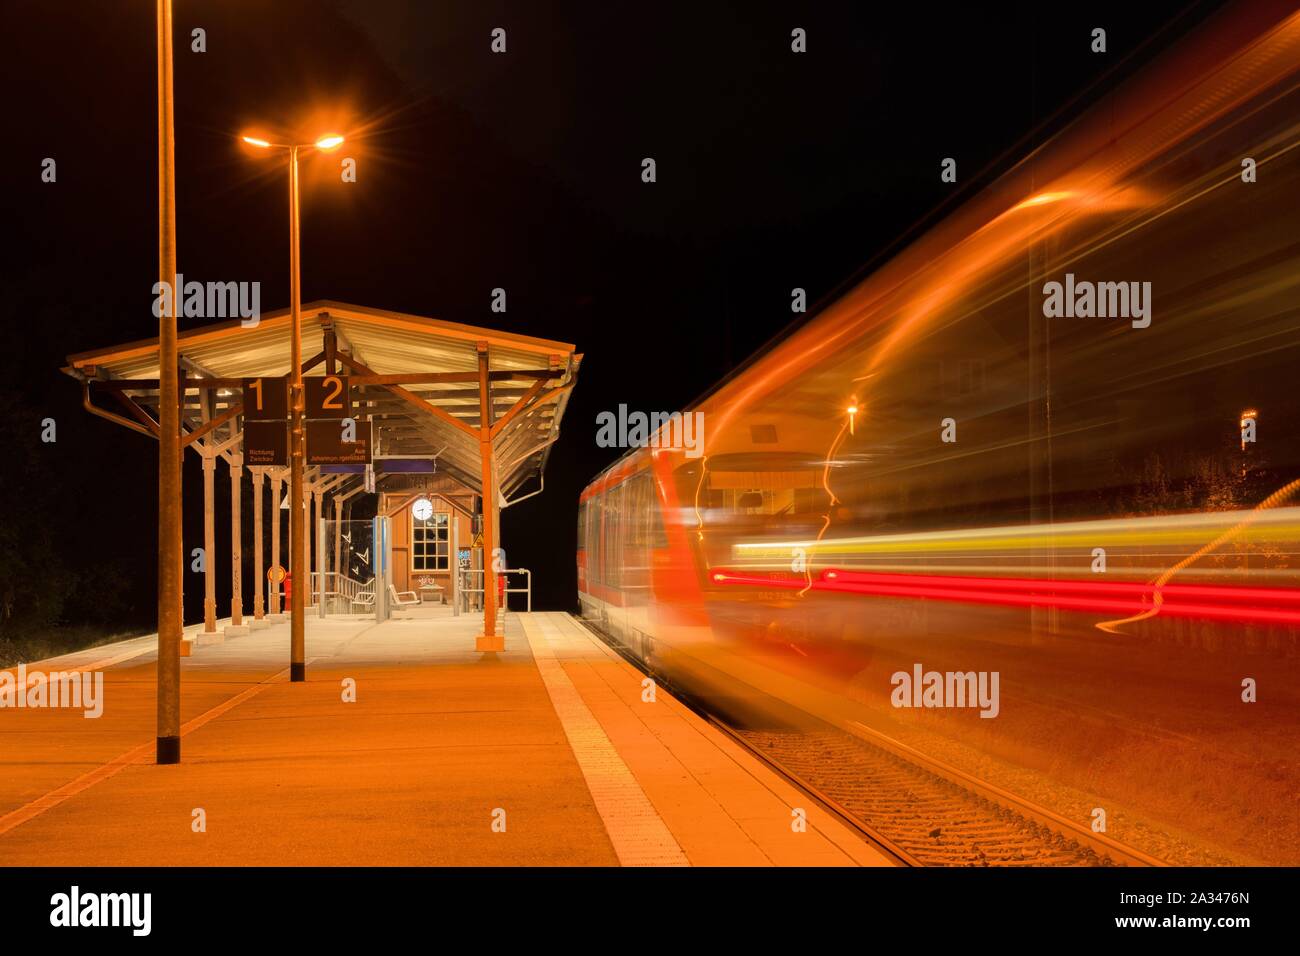 Railway station at night with moving train, Hartenstein, Saxony, Germany Stock Photo